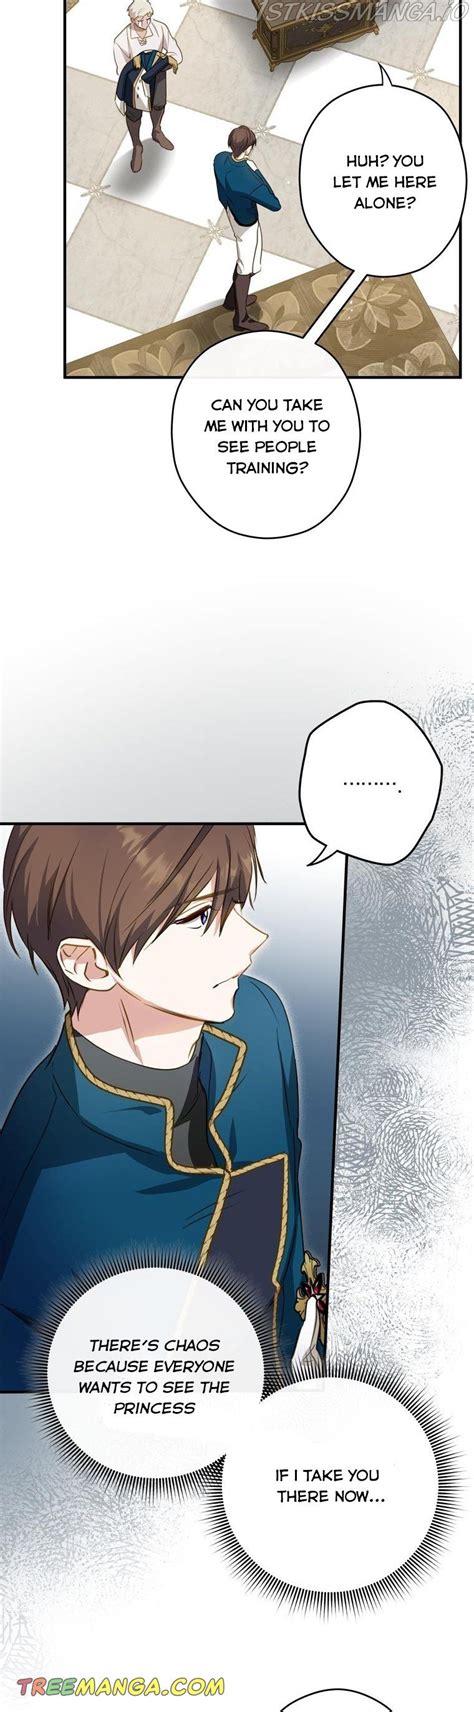 Wasn’t the Male Lead a Female? - Chapter 25 - Manhwa Clan